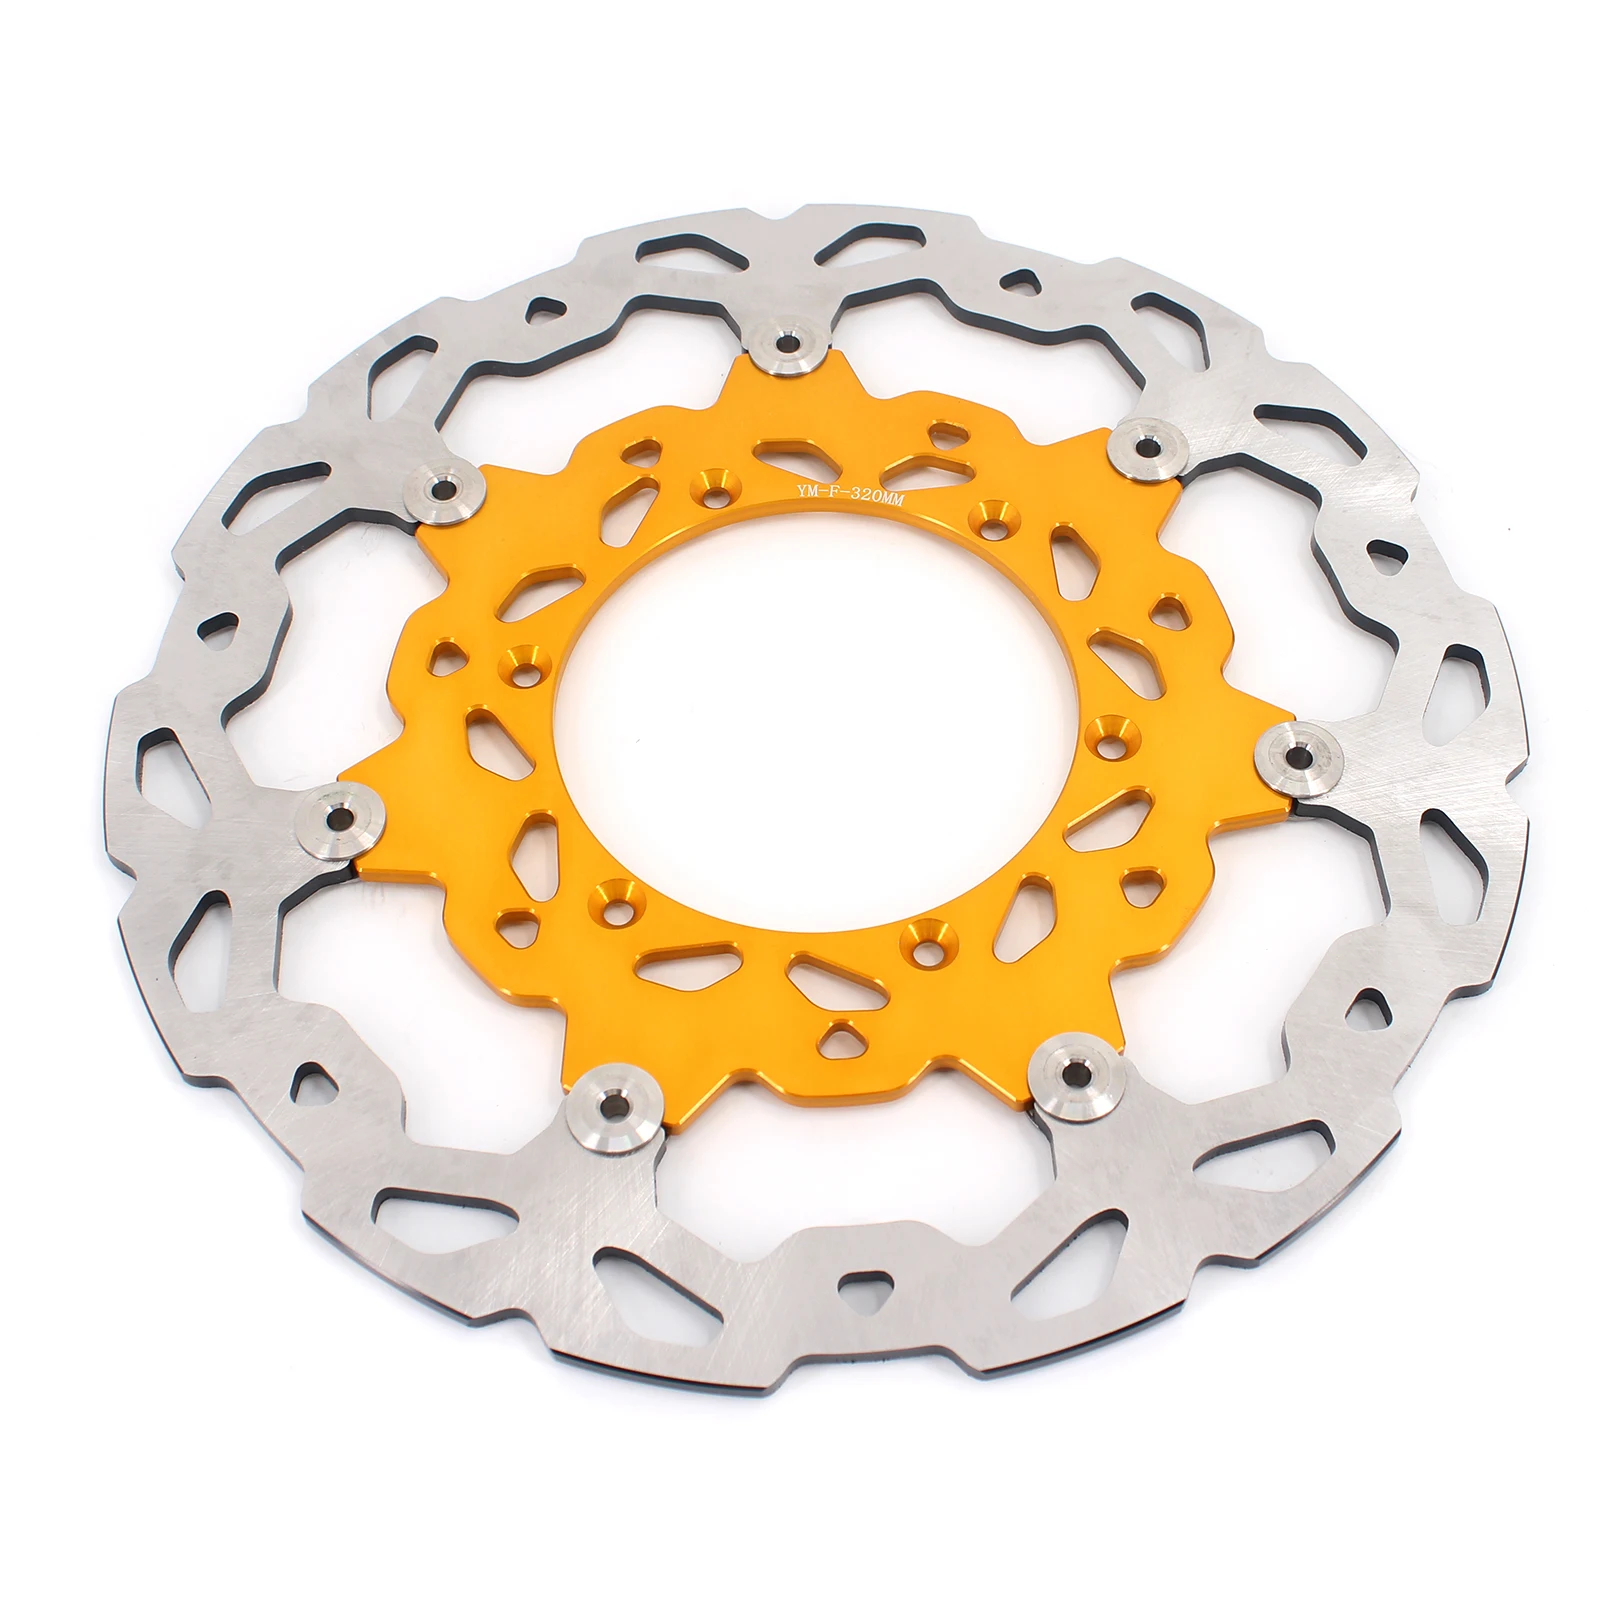 

KKE 320mm Floating Brake Disc Front Aluminium Brake Rotors Compatible with YZ125/250 YZ250F/450F WR250F/450F